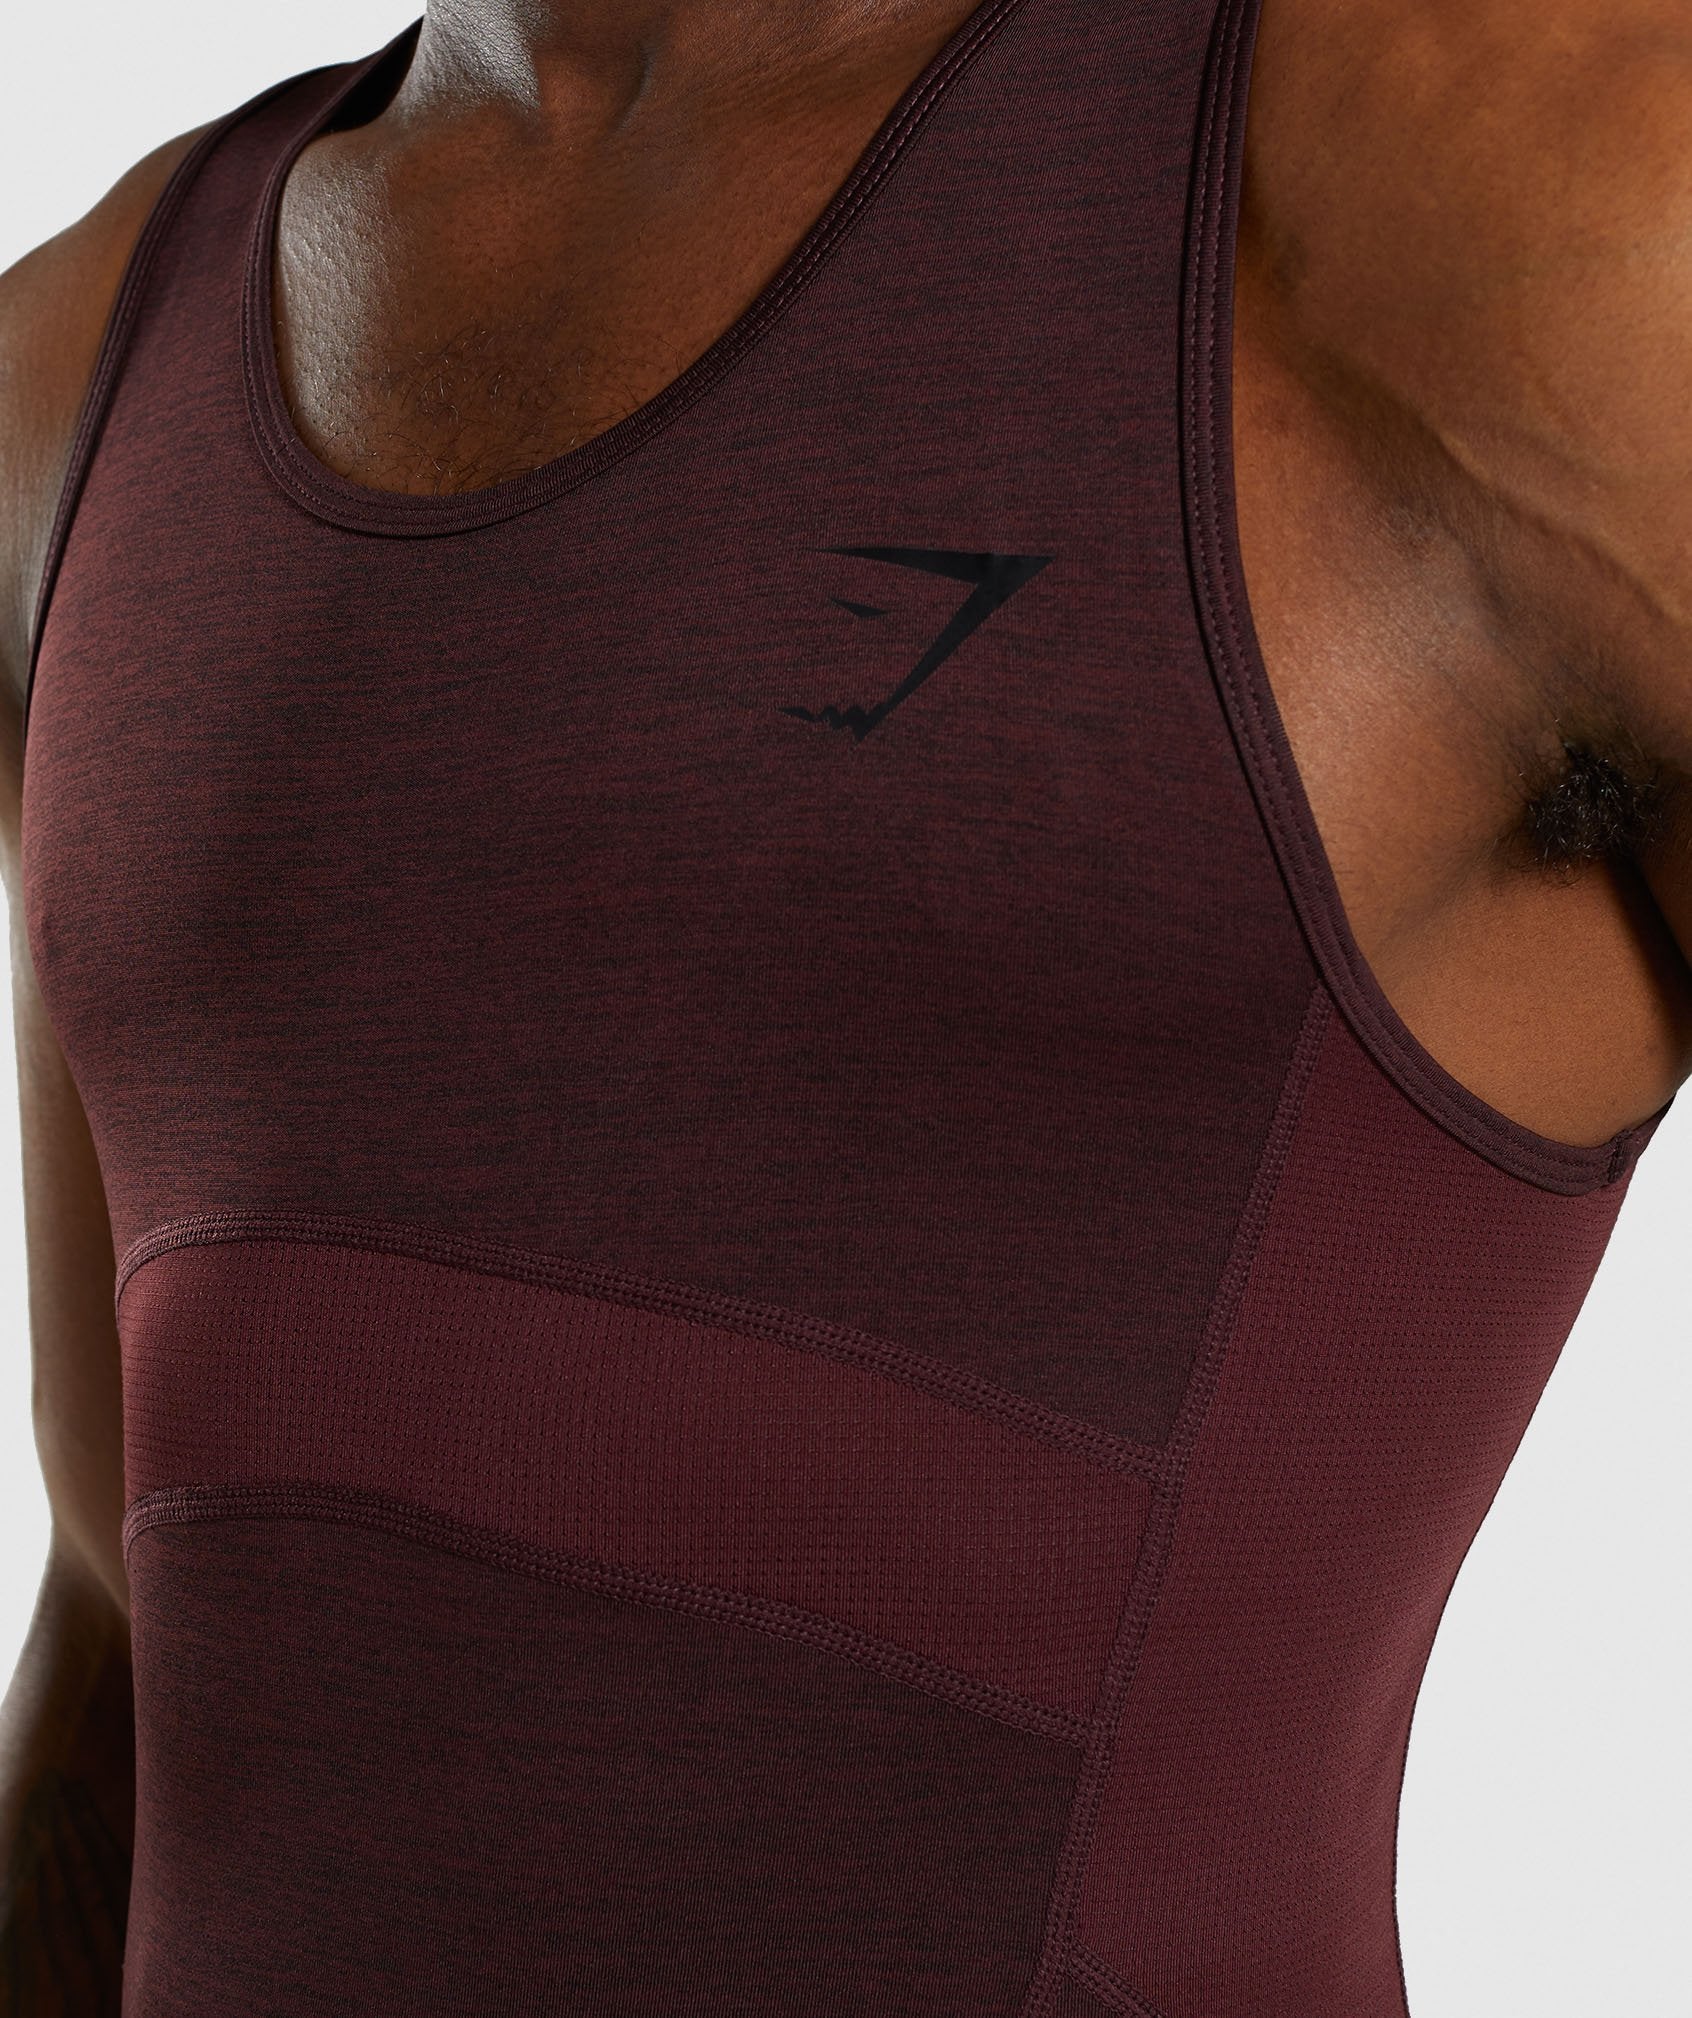 Element+ Baselayer Tank in Ox Red Marl - view 5